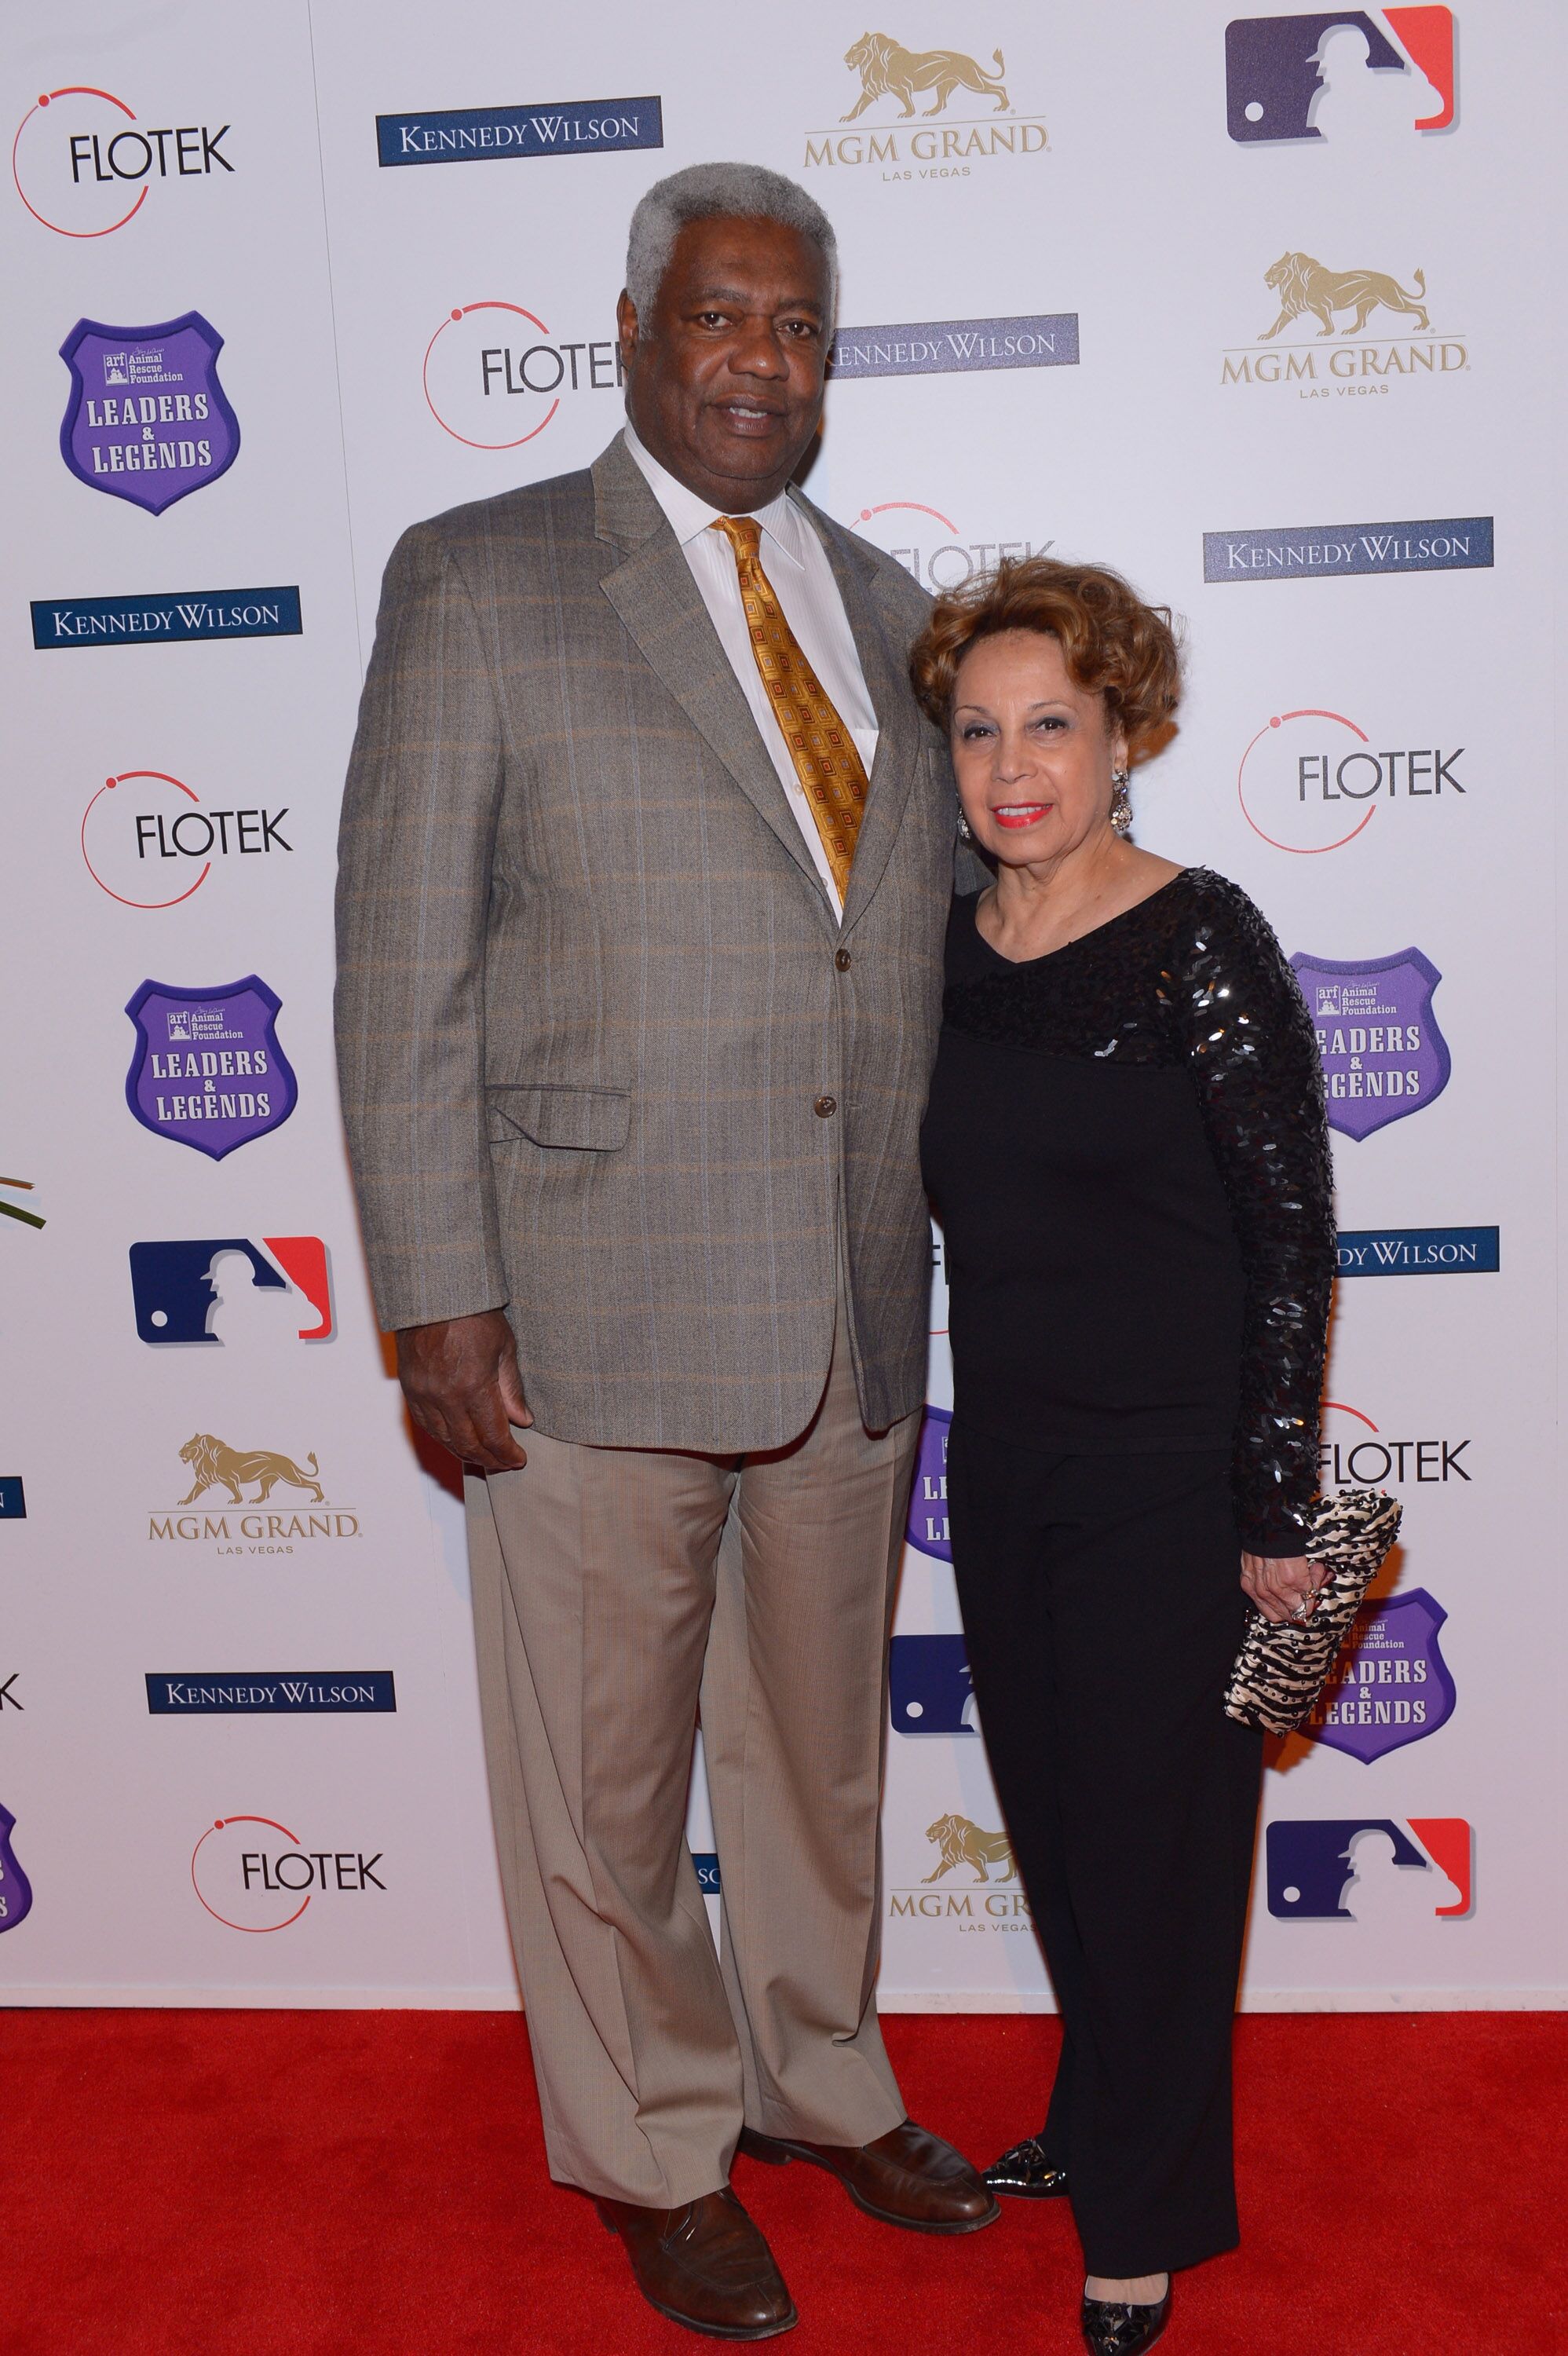 Oscar Robertson and wife Yvonne Crittenden at Tony La Russa's 2nd annual Leaders & Legends gala for the Animal Rescue Foundation on November 22, 2013 | Photo: Getty Images